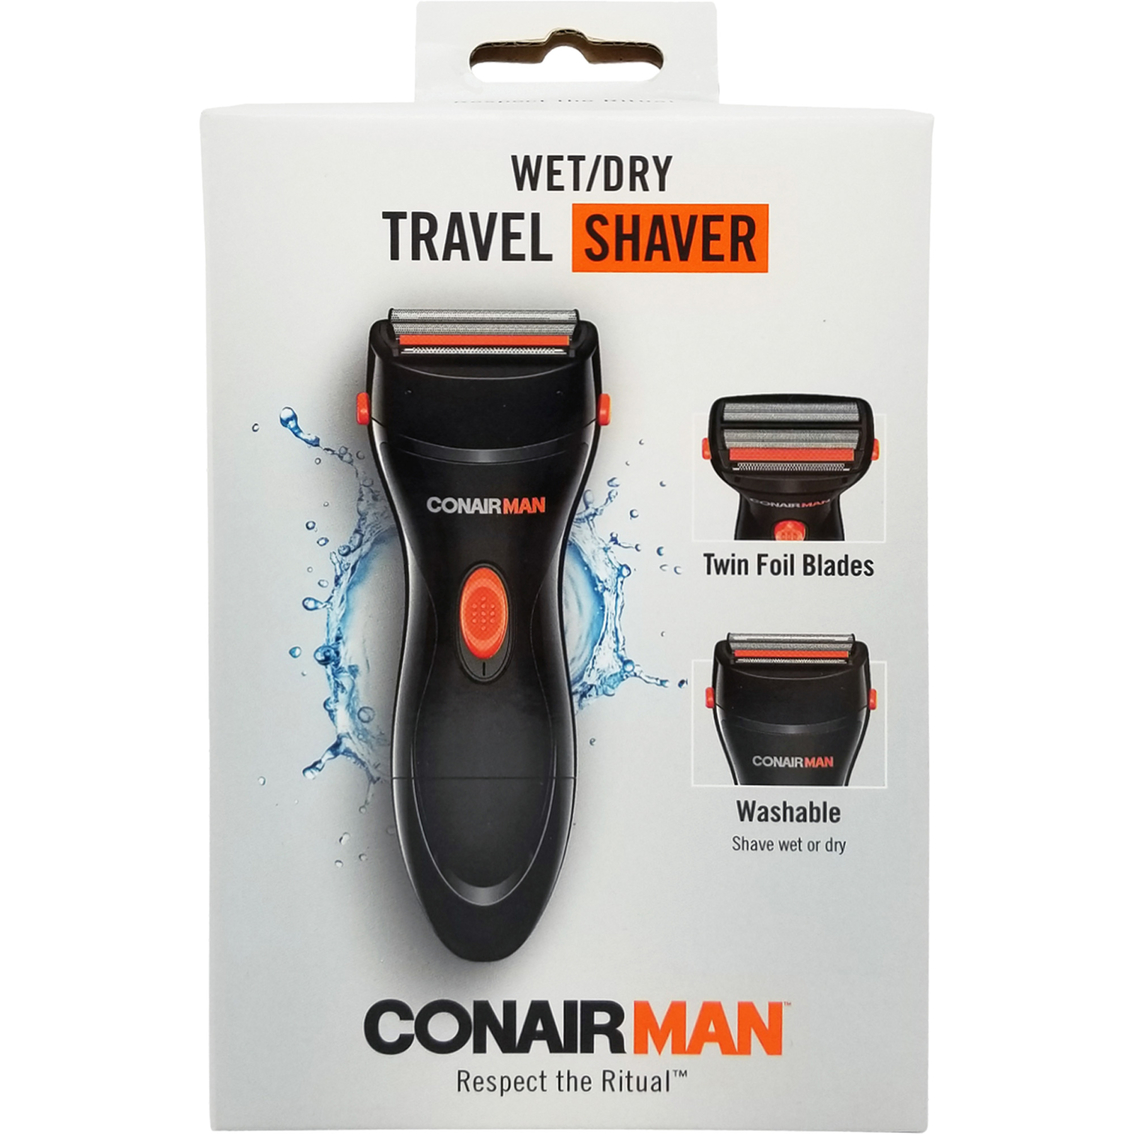 Conair Man Wet and Dry Travel Shaver - Image 5 of 5